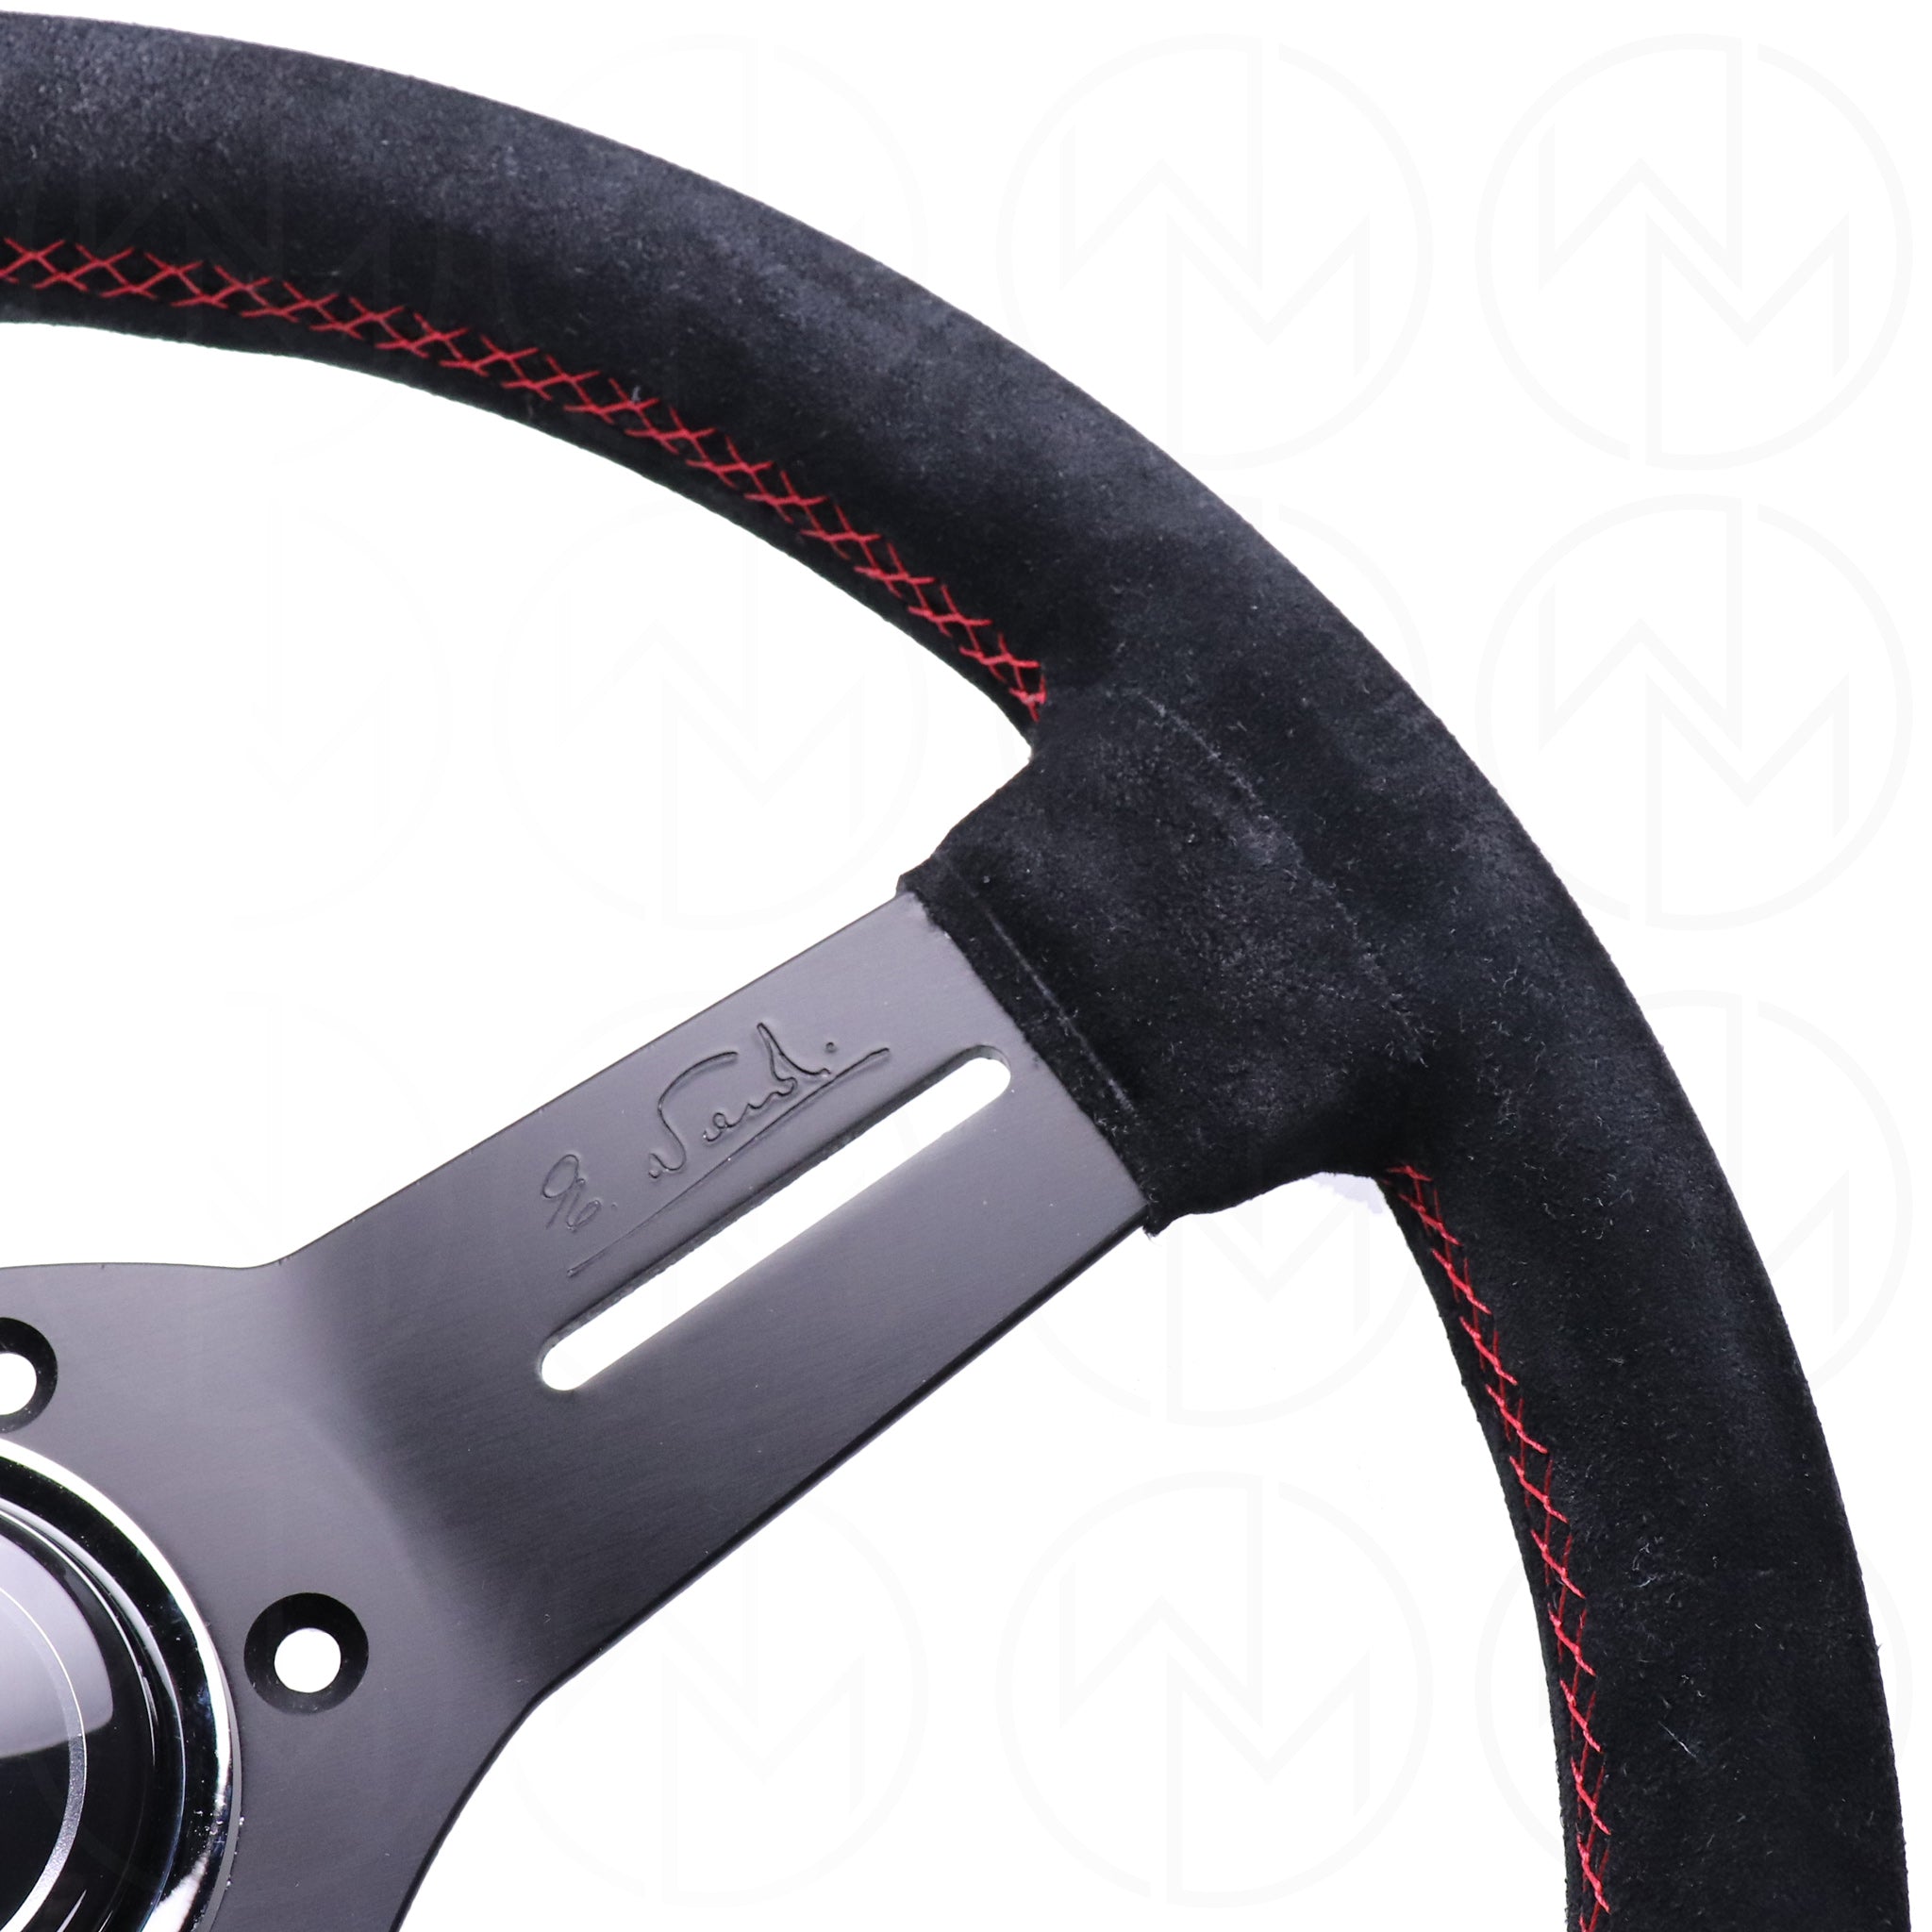 Nardi Competition Steering Wheel - 330mm Suede w/Red Stitch